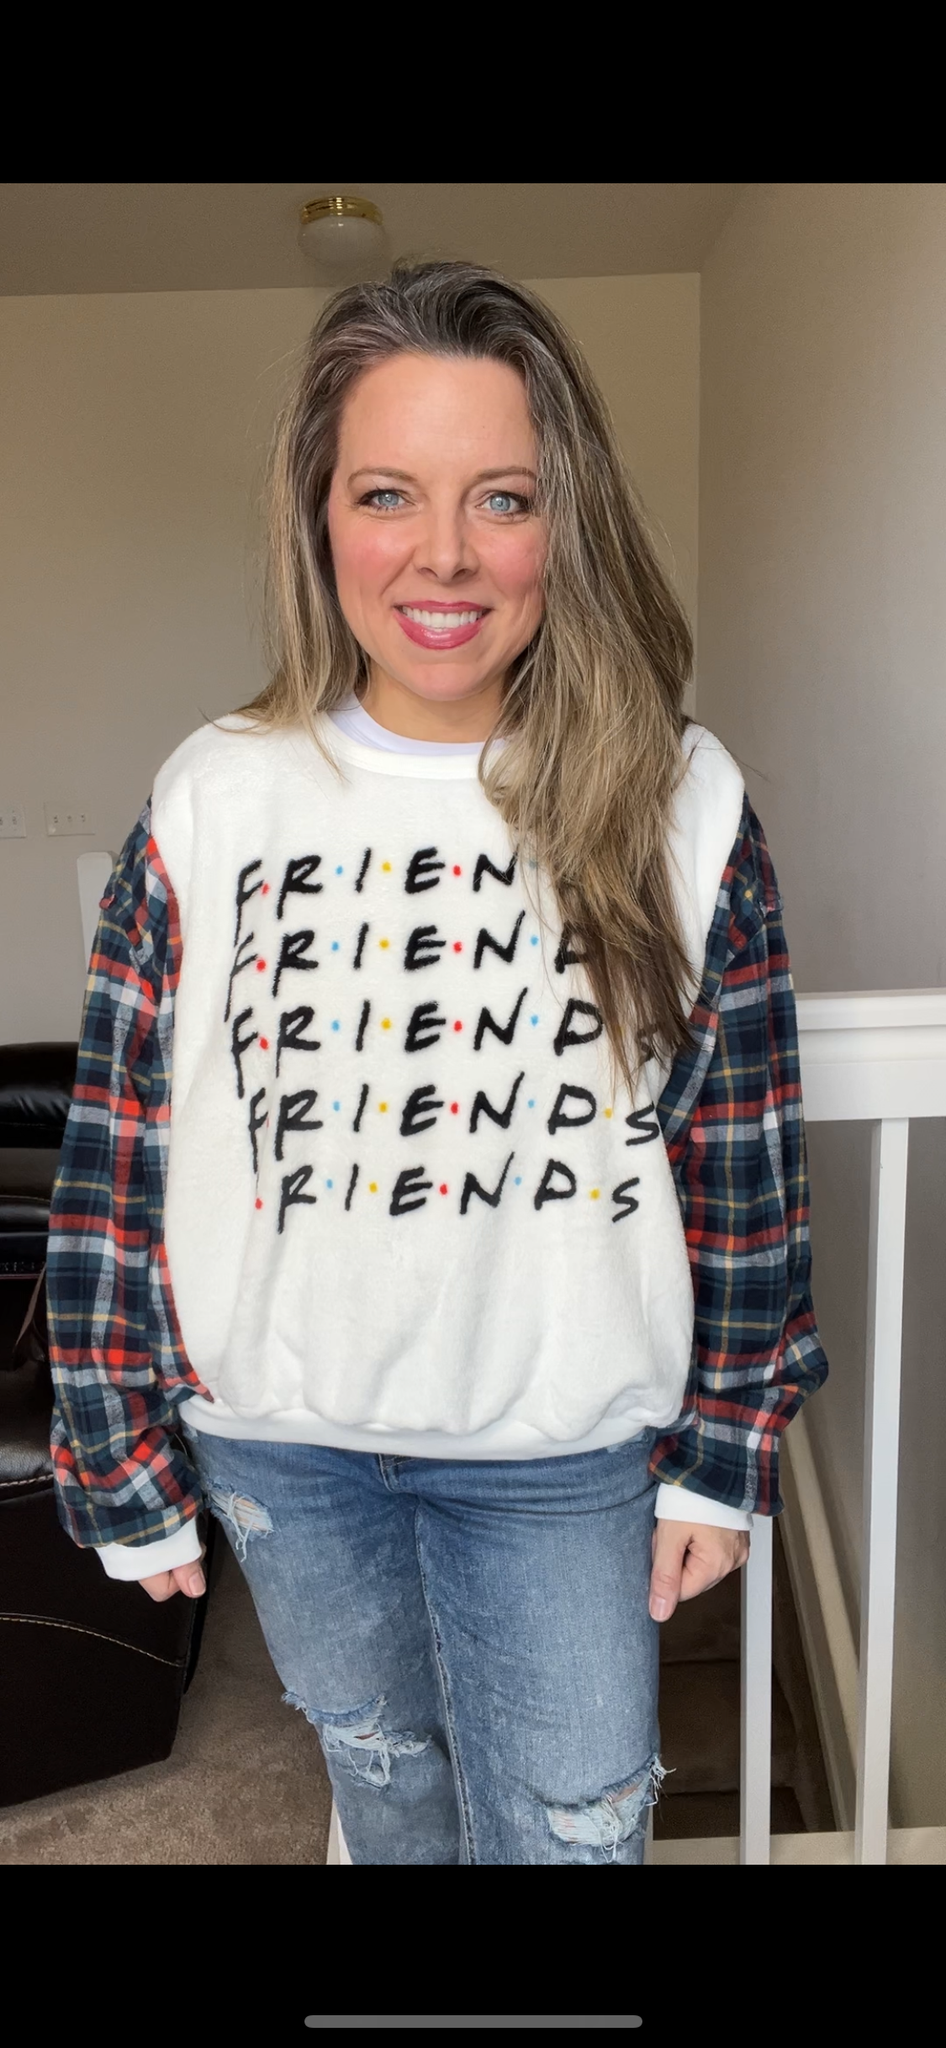 Upcycled Friends - ￼ Women’s S/M – fuzzy sweatshirt with flannel sleeves￼